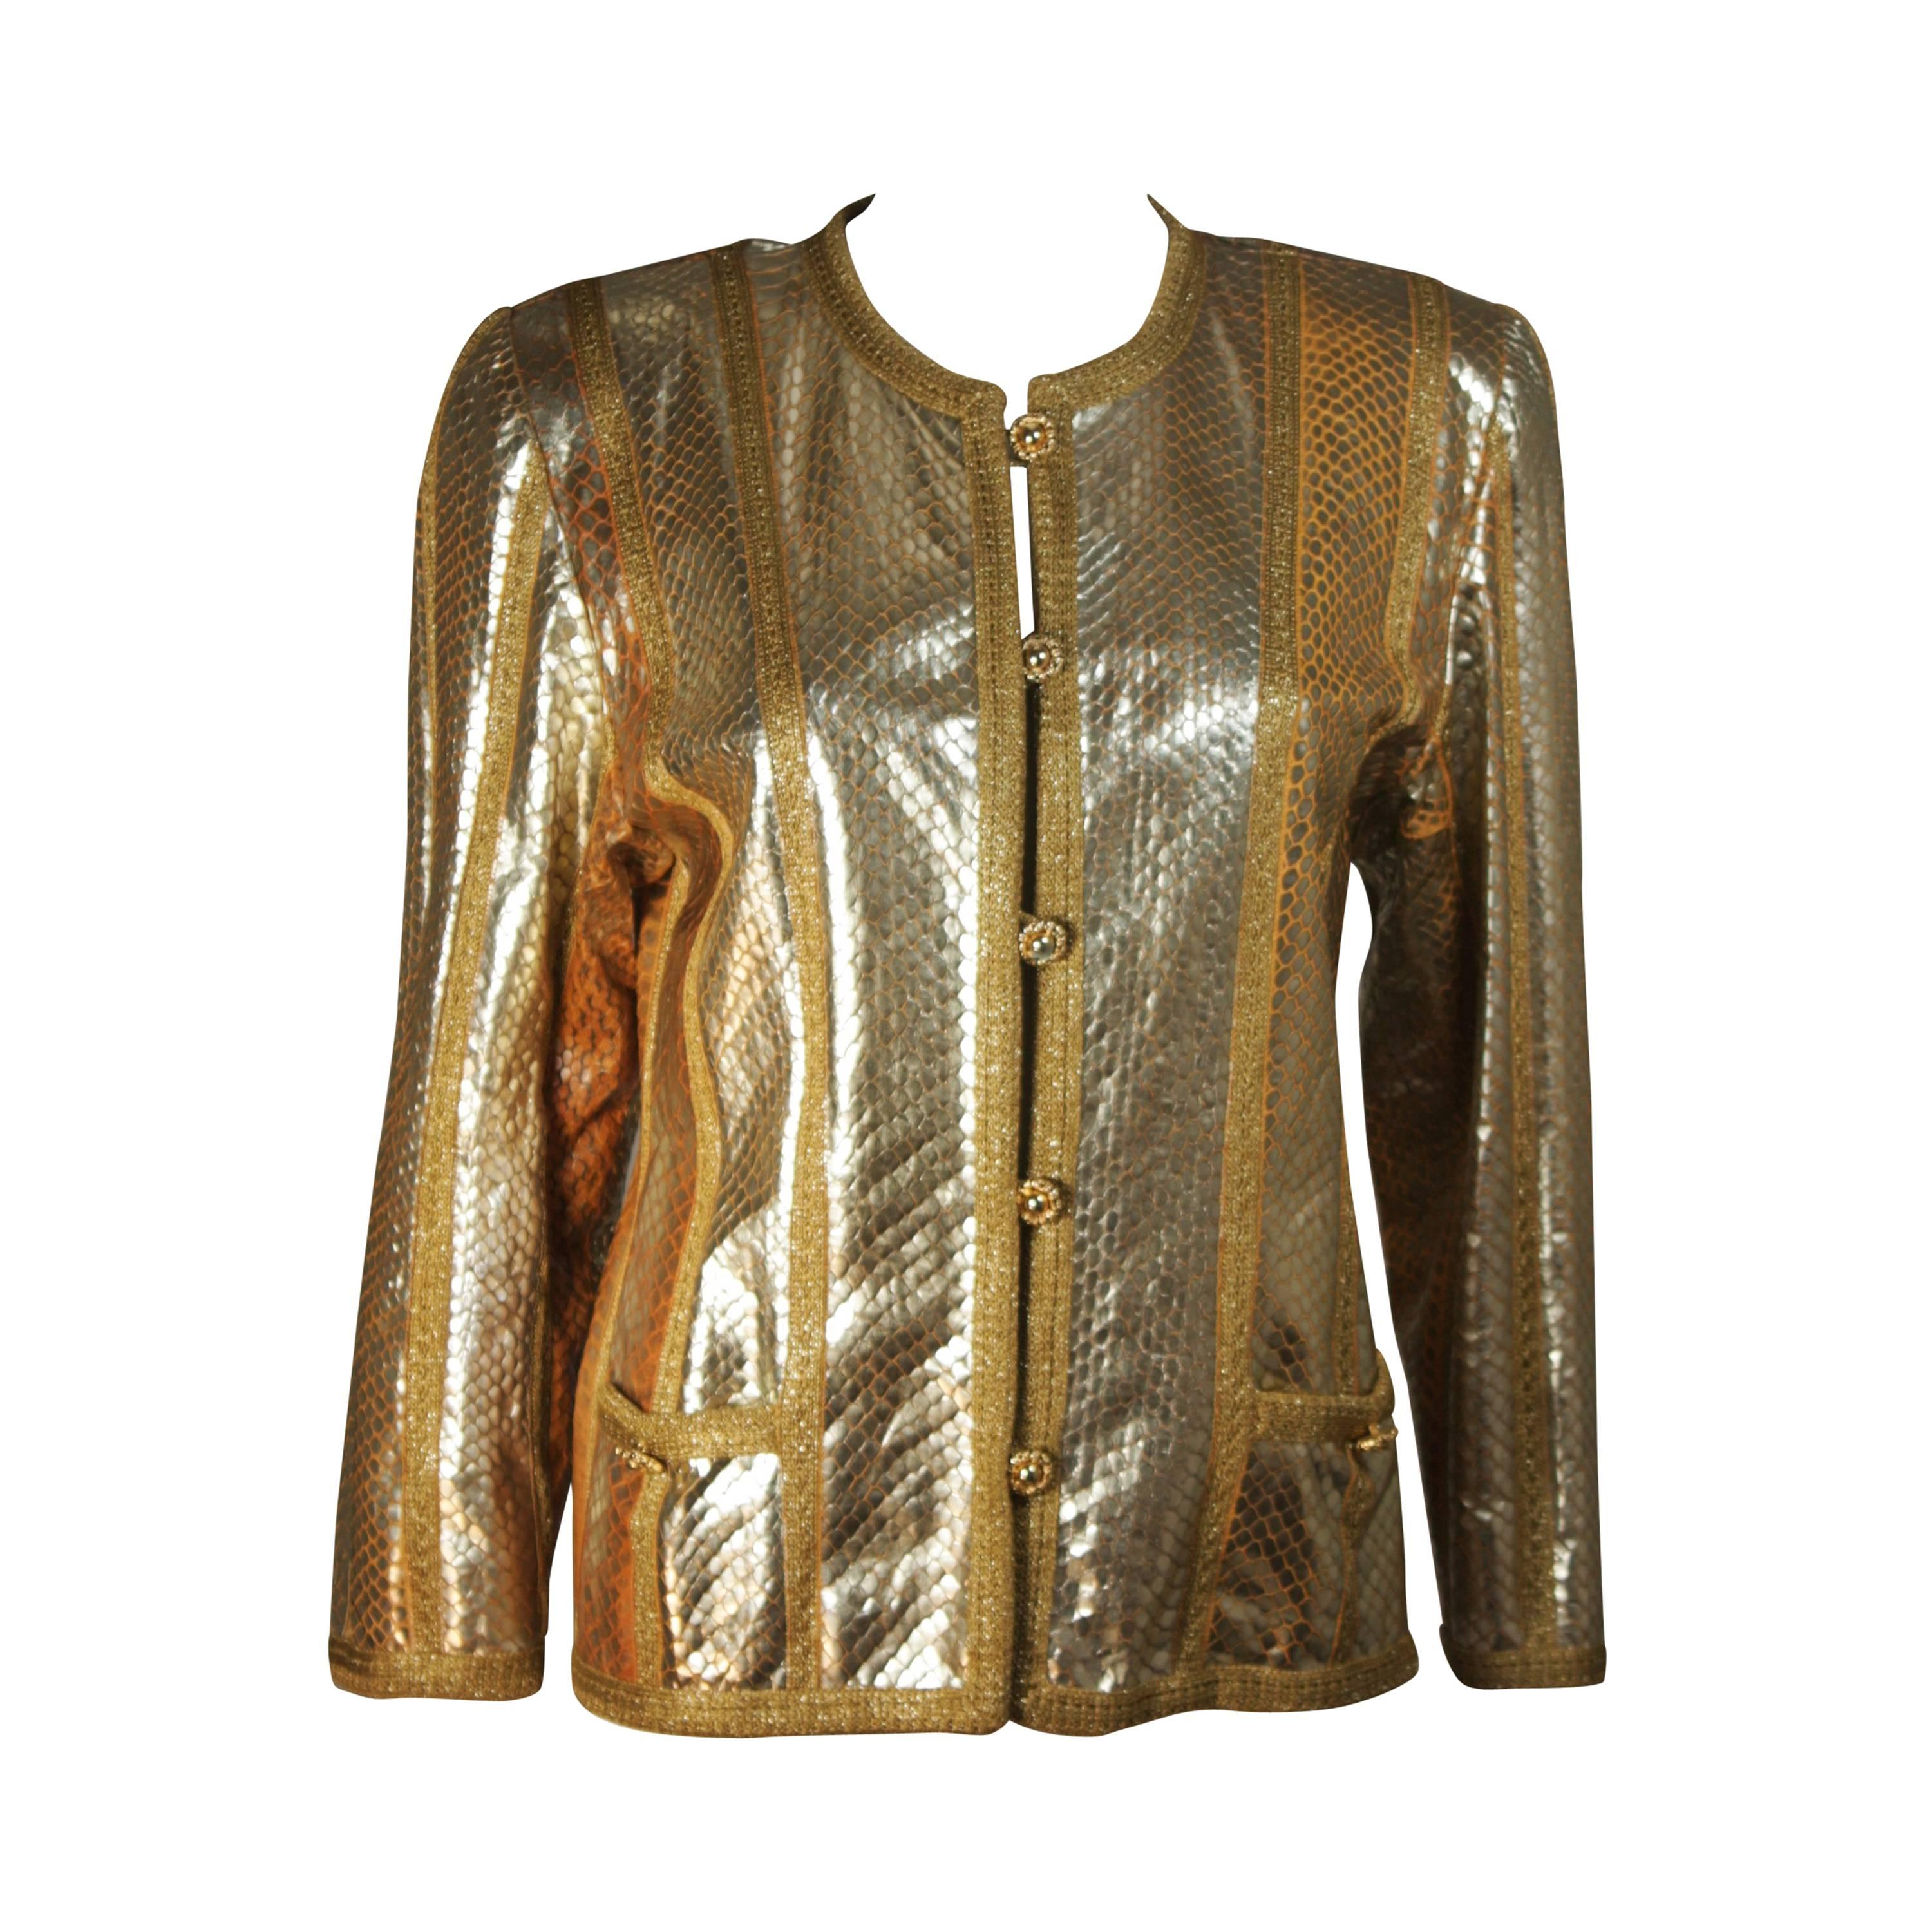 AMEN WARDY Gold Metallic Foiled Snakeskin Jacket with Knit Detailing Size M L